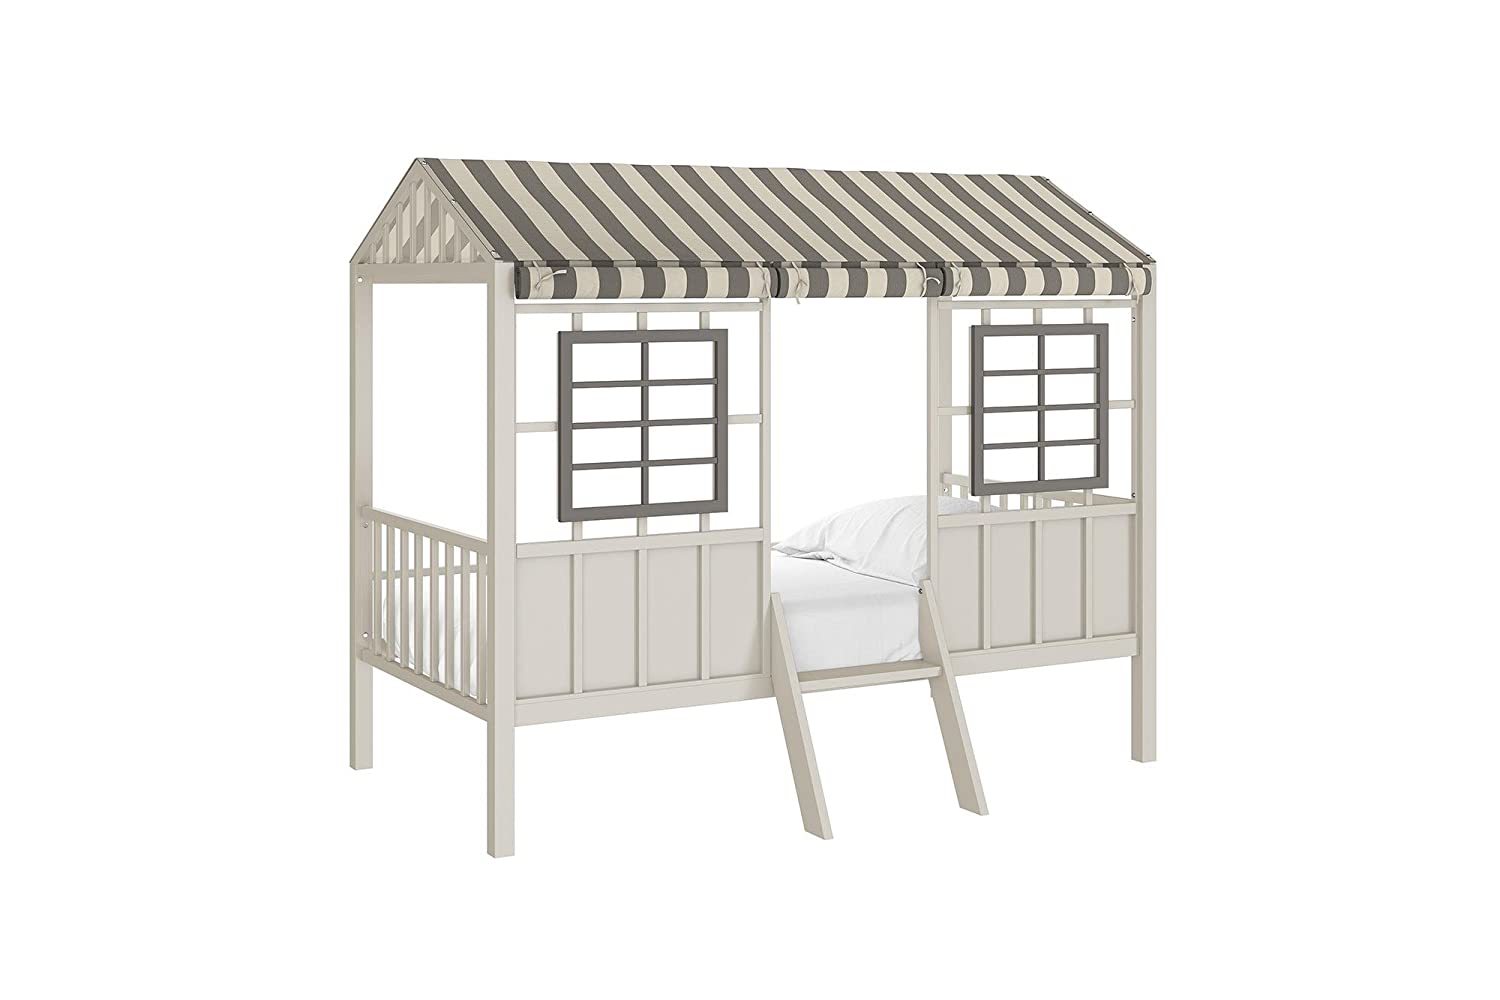 Primary image for Little Seeds Rowan Valley Forest Loft Bed, Grey/Taupe, Twin